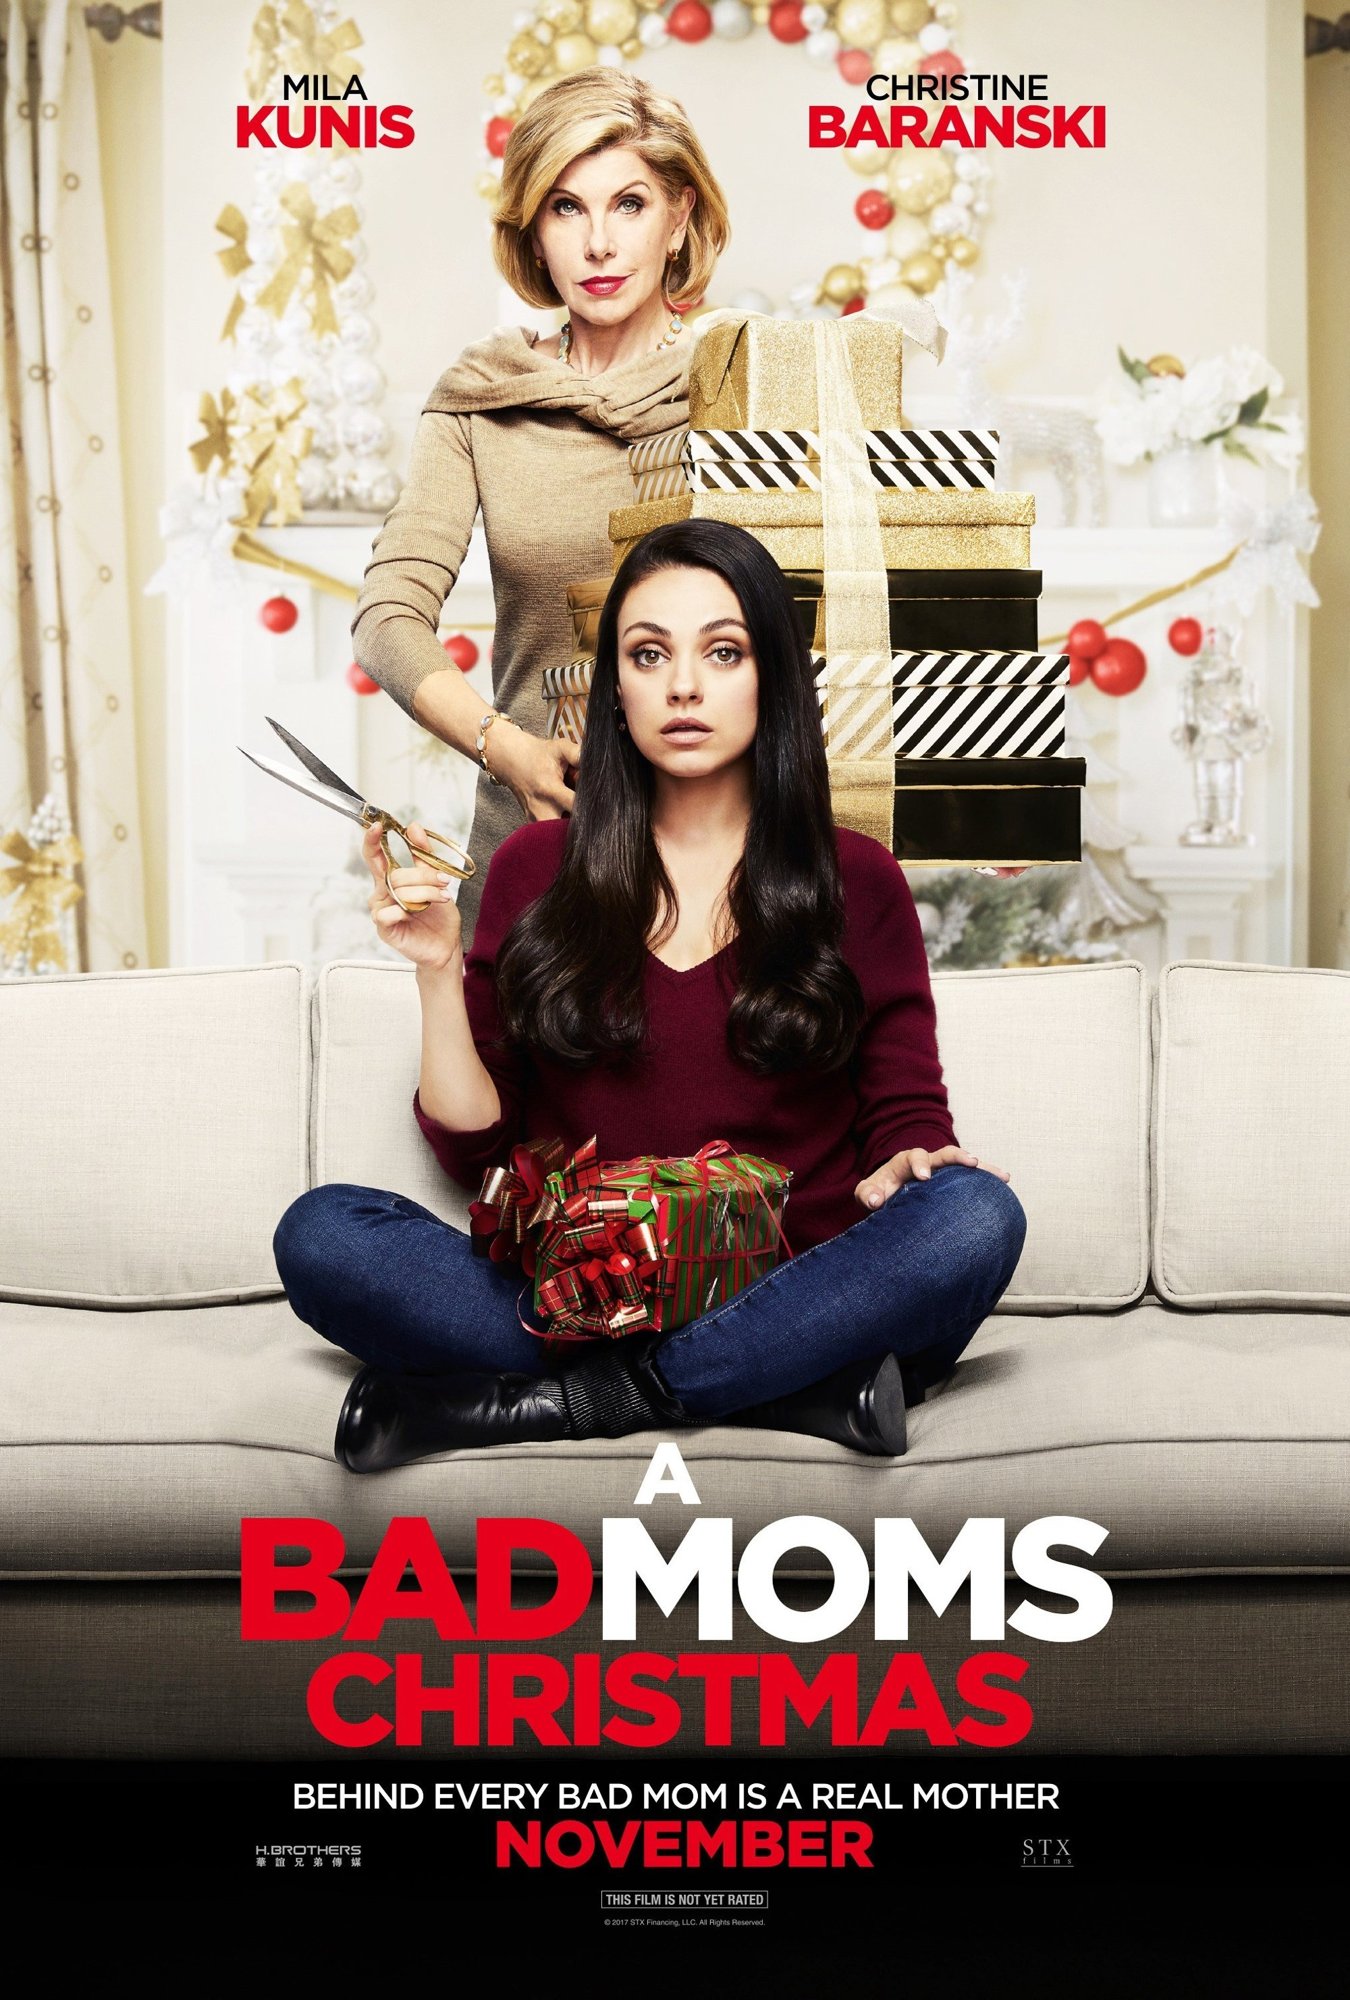 A Bad Moms Christmas Picture 5 